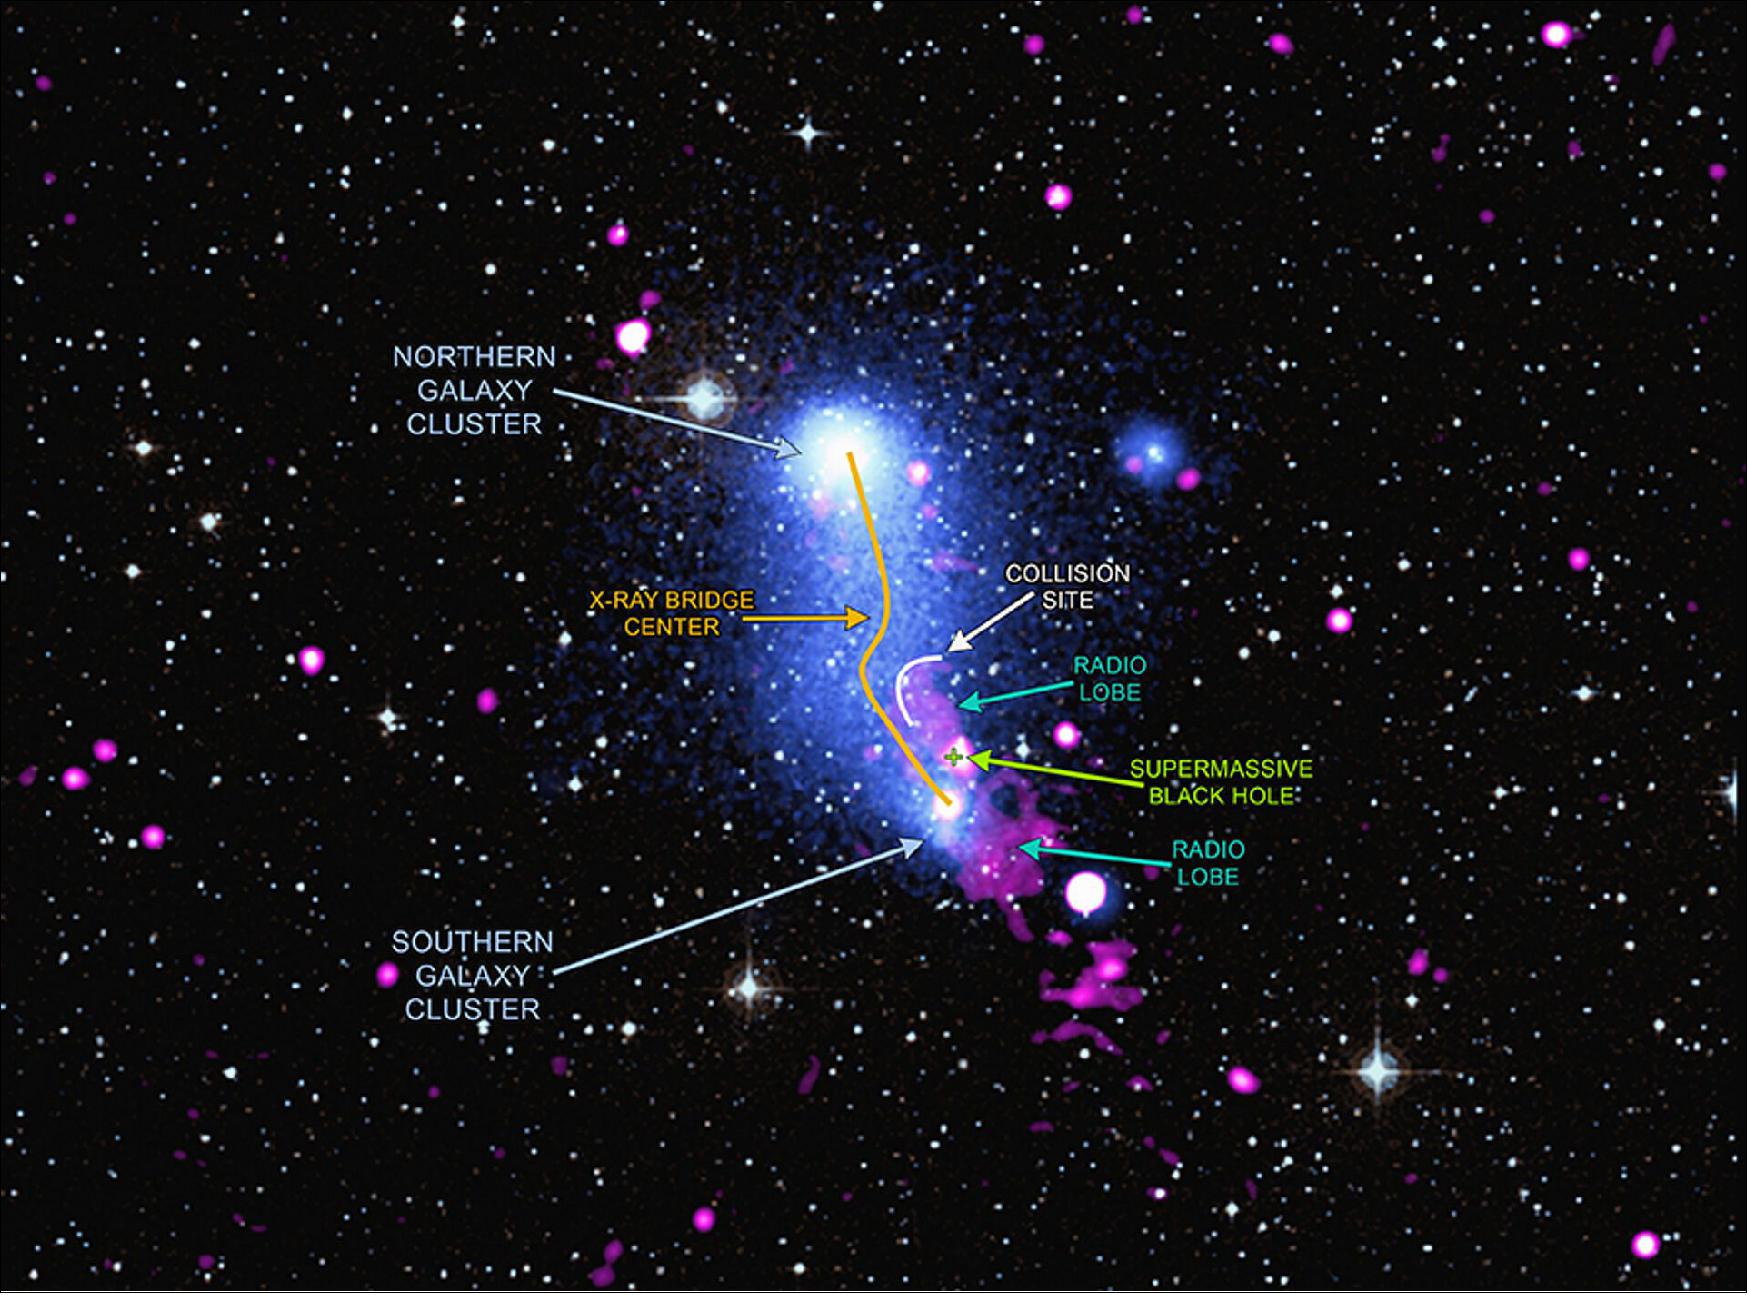 Figure 32: Bridge between galaxy clusters in Abell 2384 - annotated. A composite view of the Abell 2384 system, comprising two galaxy clusters located 1.2 billion light years from Earth. The X-ray view from ESA's XMM-Newton and NASA's Chandra X-ray observatories is shown in blue, alongside observations in radio waves performed with the Giant Meterwave Radio Telescope in India (shown in red) and optical data from the Digitized Sky Survey (shown in yellow). The two clusters, comprising each many galaxies, vast amounts of hot gas even larger amounts of unseen dark matter, are linked by a three million light-year long bridge of hot gas that shines brightly in X-rays. This new multi-wavelength view reveals the effects of a jet shooting away from a supermassive black hole in the center of a galaxy in one of the clusters (image credit: X-ray: NASA/CXC/SAO/V. Parekh, et al. & ESA/XMM-Newton; Radio: NCRA/GMRT)